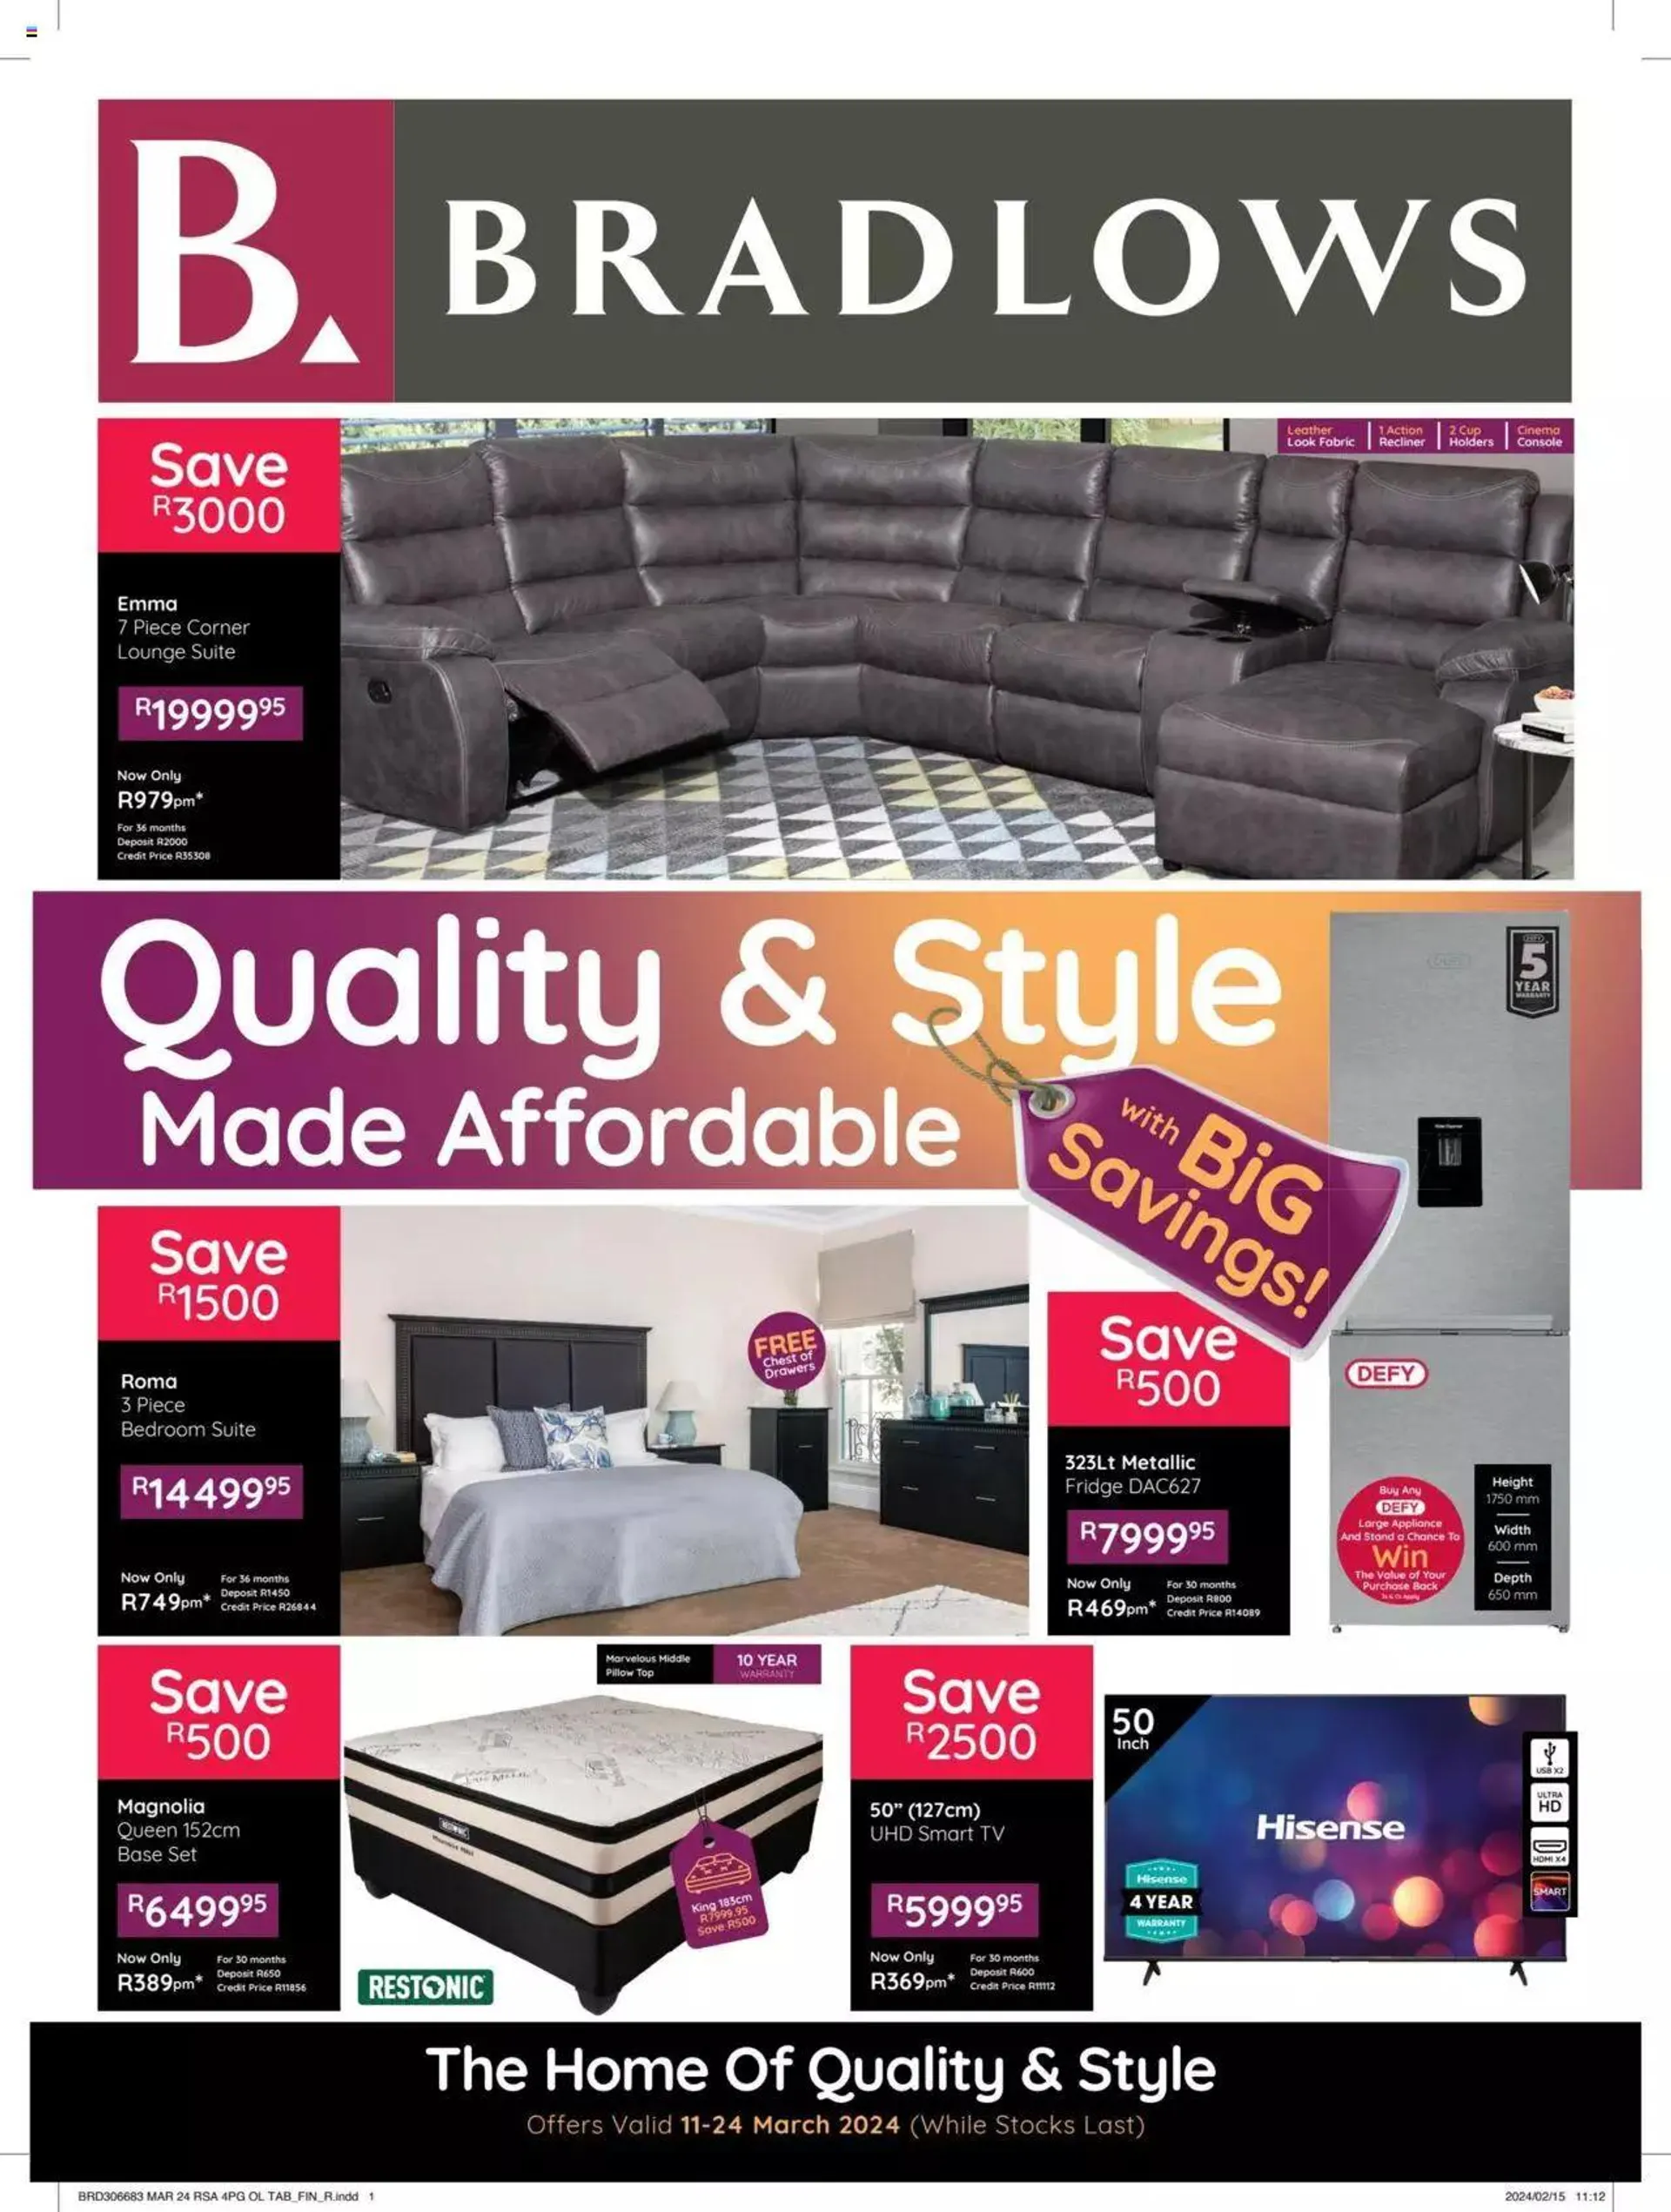 Bradlows Specials - 11 March 24 March 2024 - Page 1